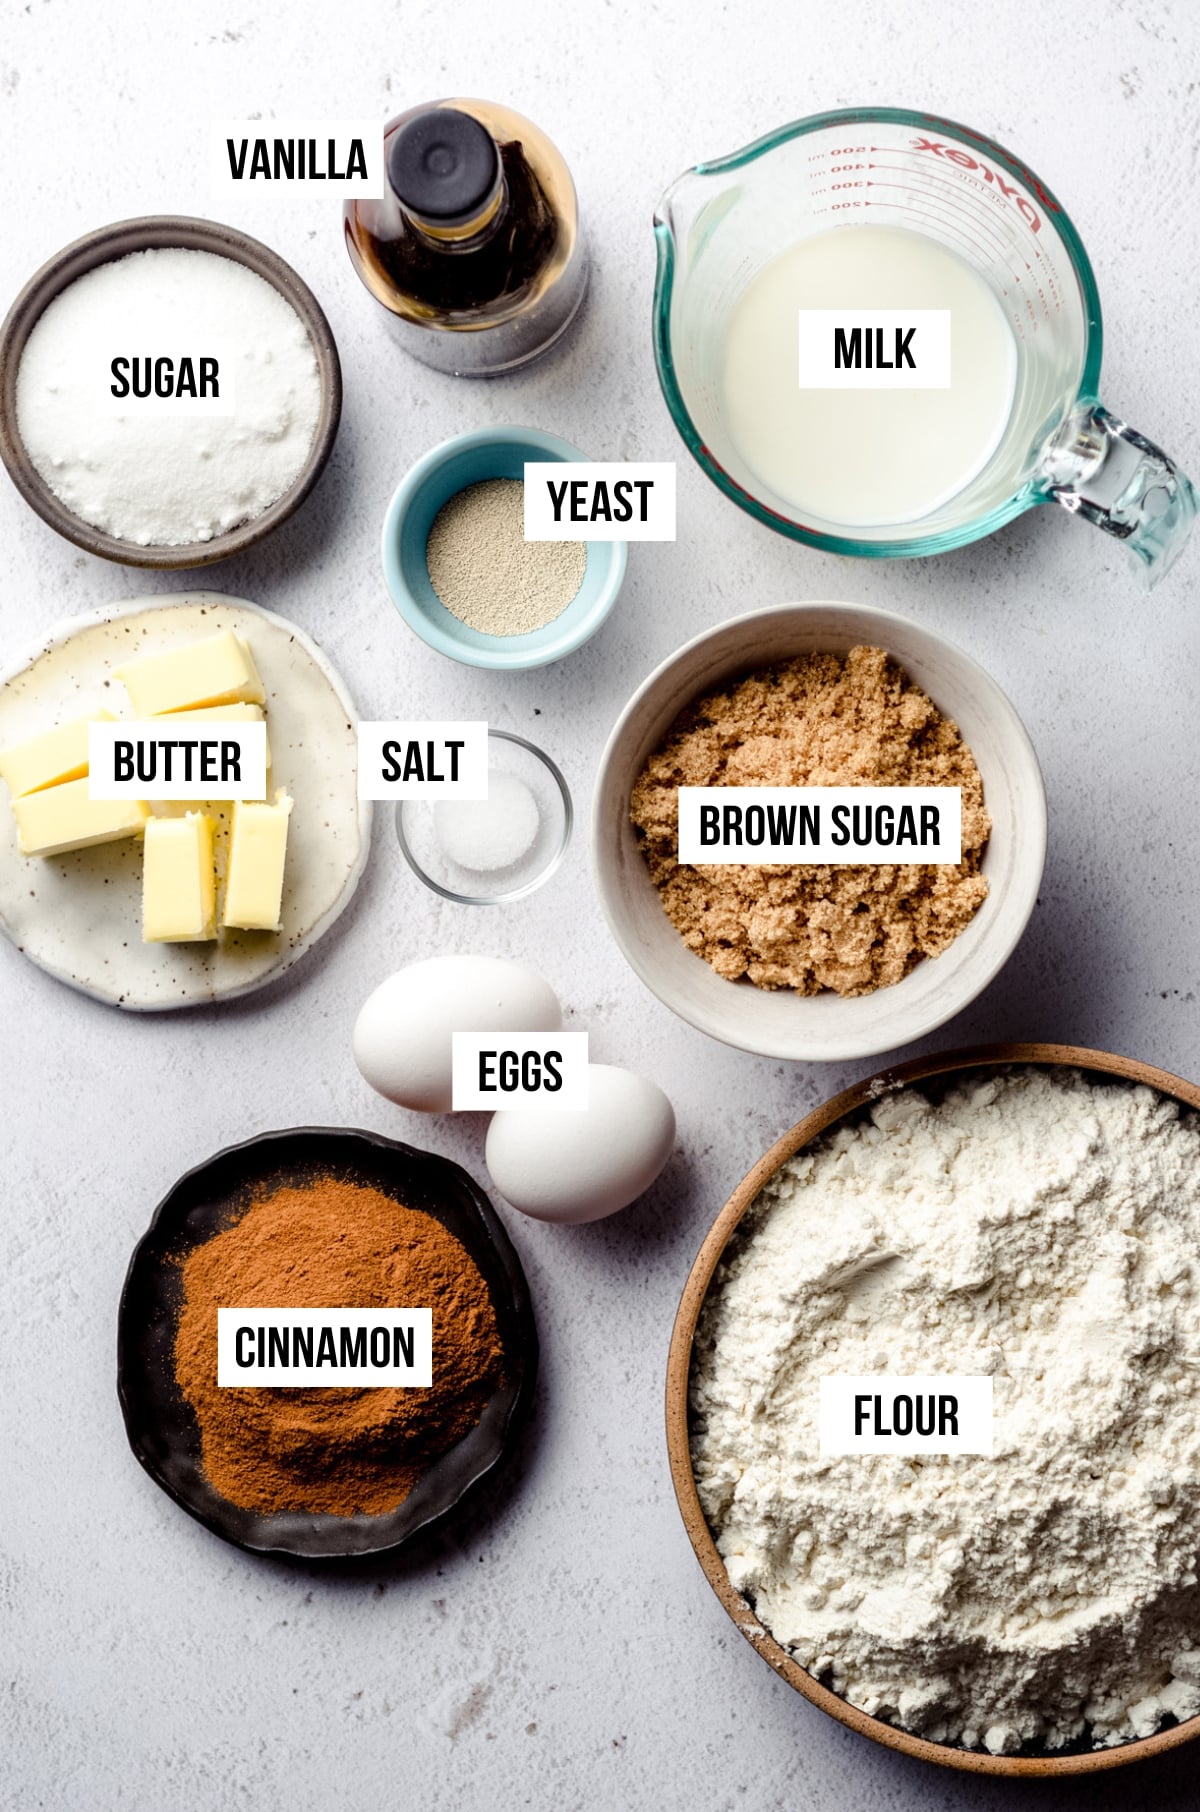 An aerial photo of cinnamon roll ingredients with labels on each ingredient.